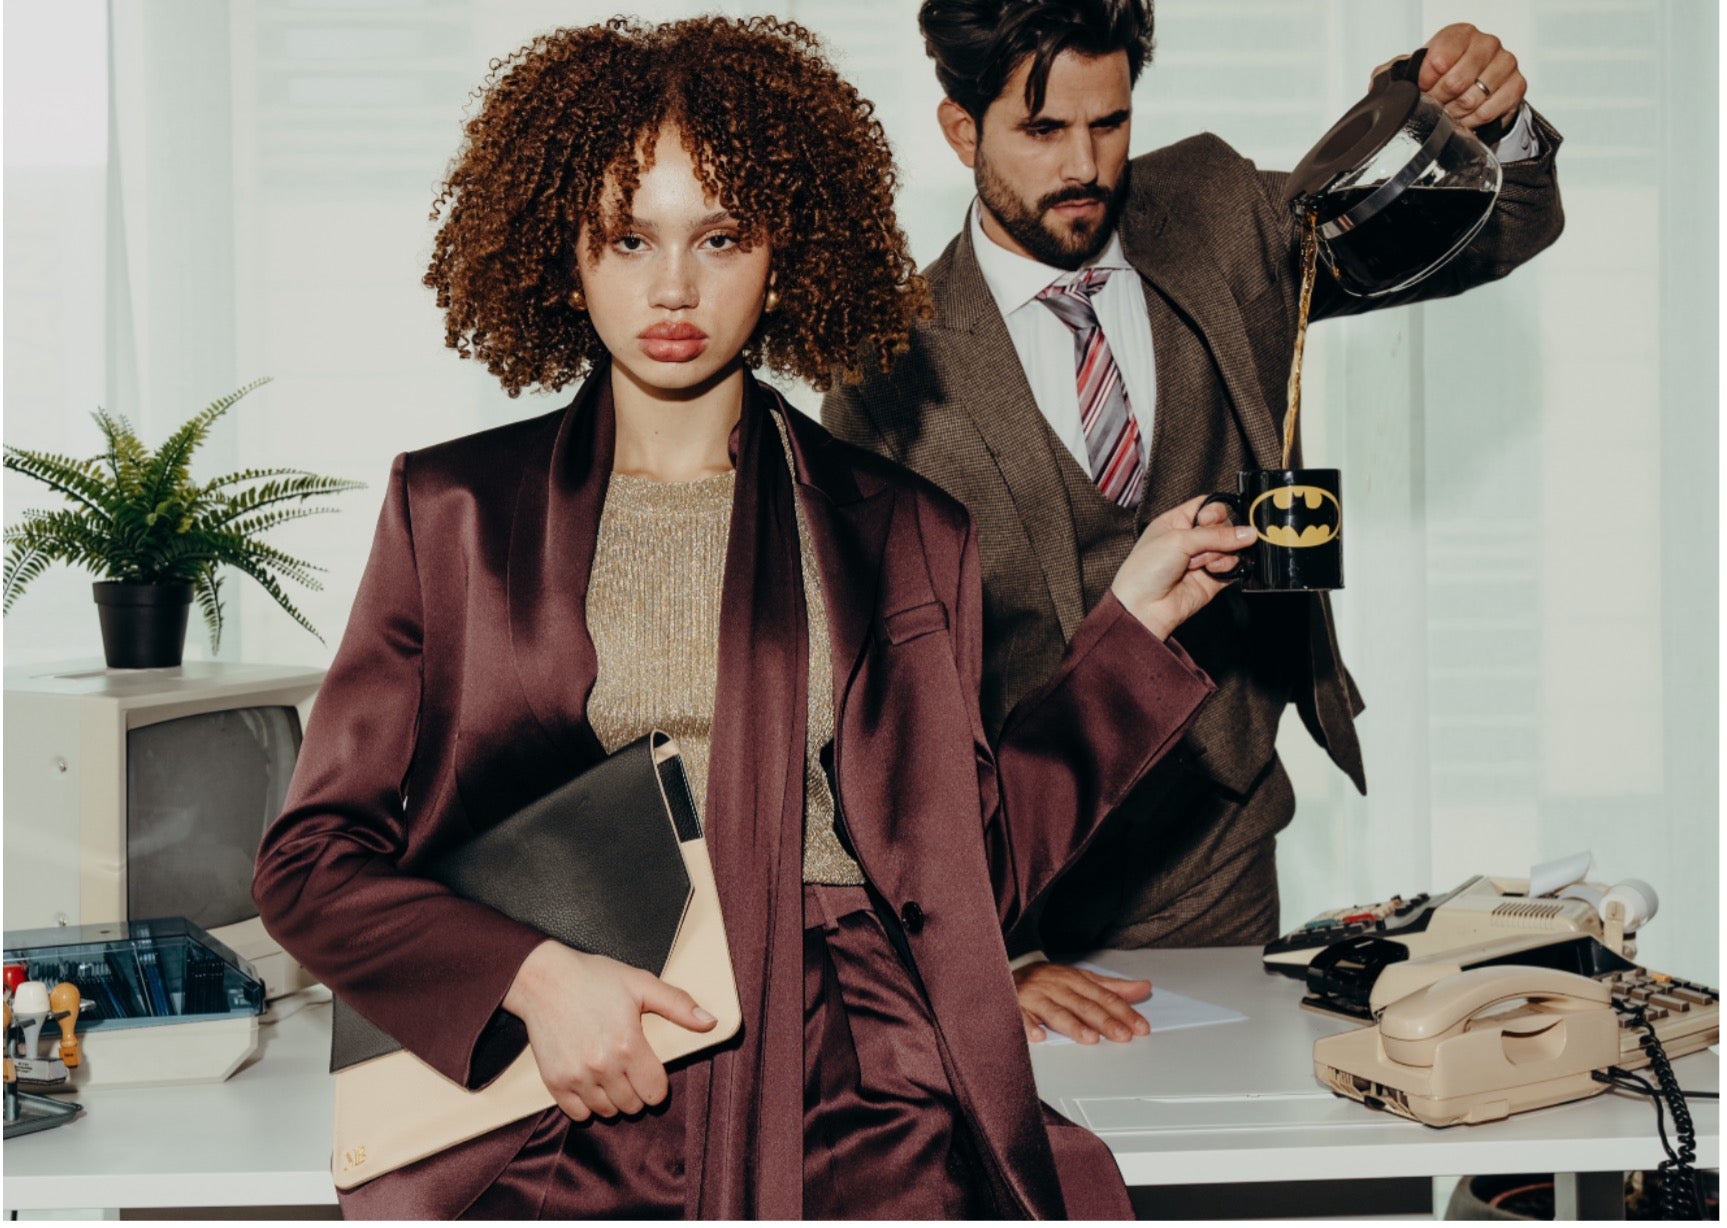 Breaking Boardroom Biases in Style – MELINA BUCHER Unveils "Money Moves" Collection in a Bold Campaign Challenging The Status Quo